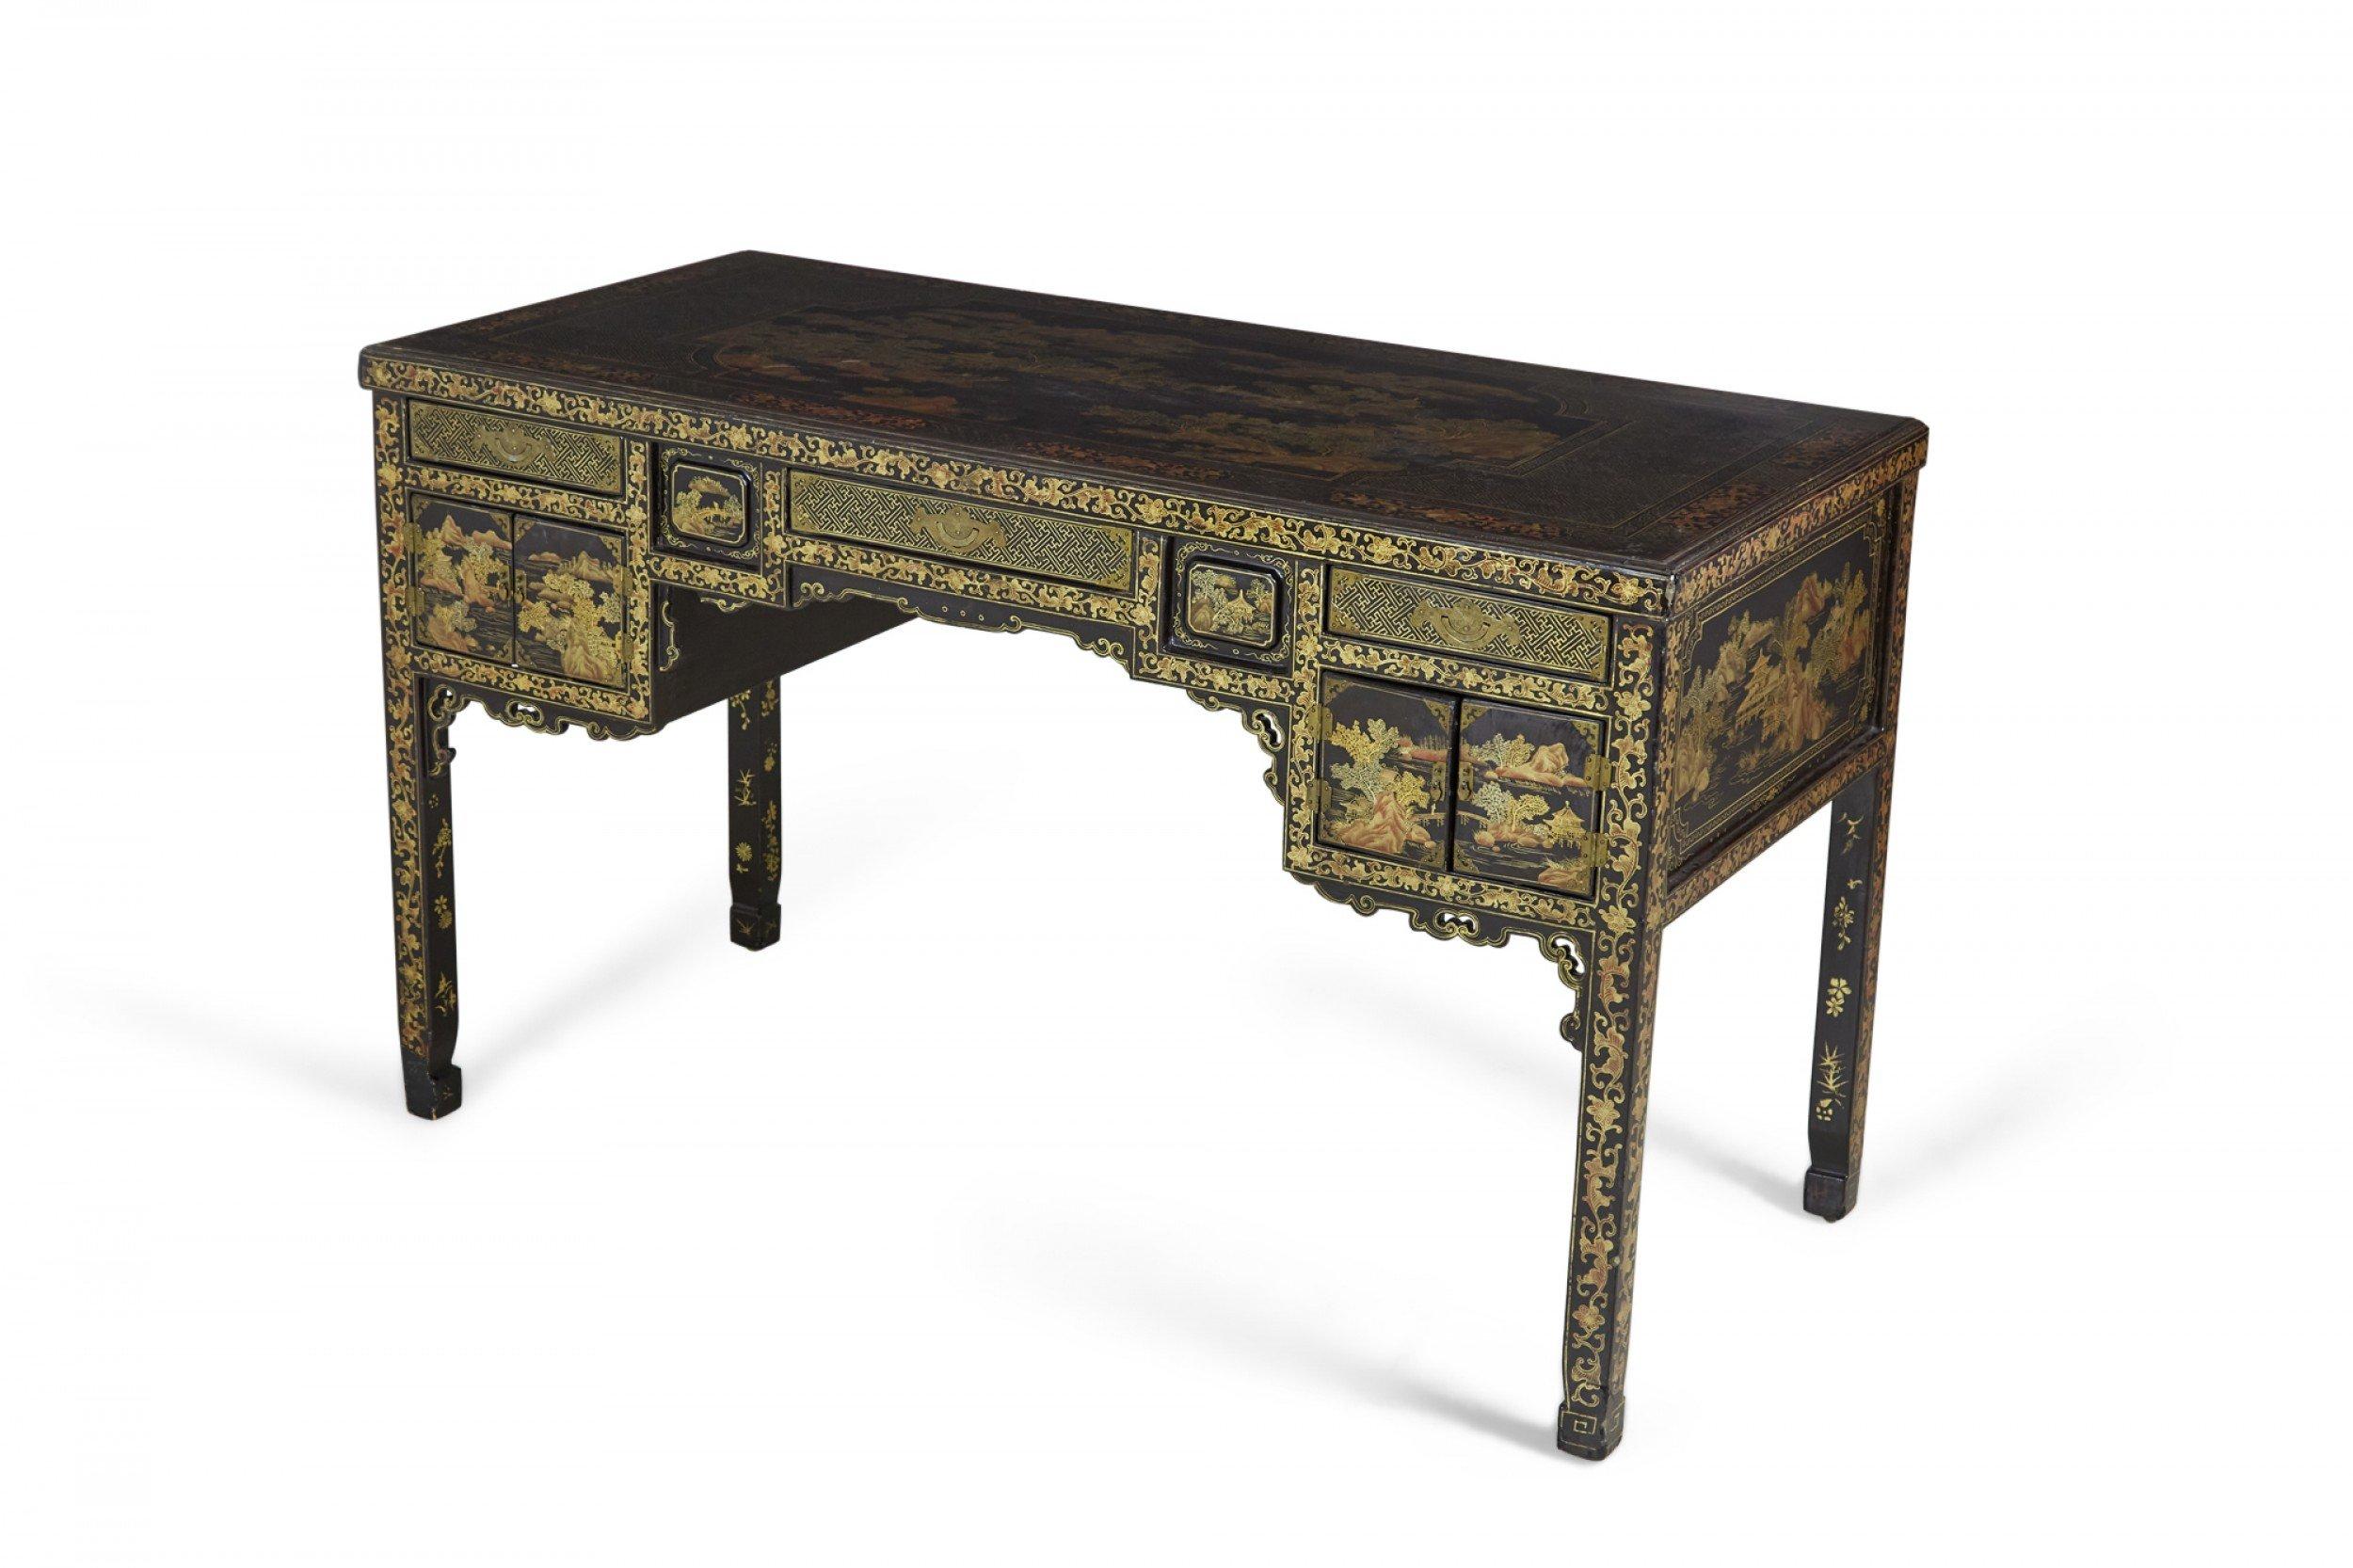 British 19th Century English Regency Chinese Export Gilt Black Lacquer Desk For Sale